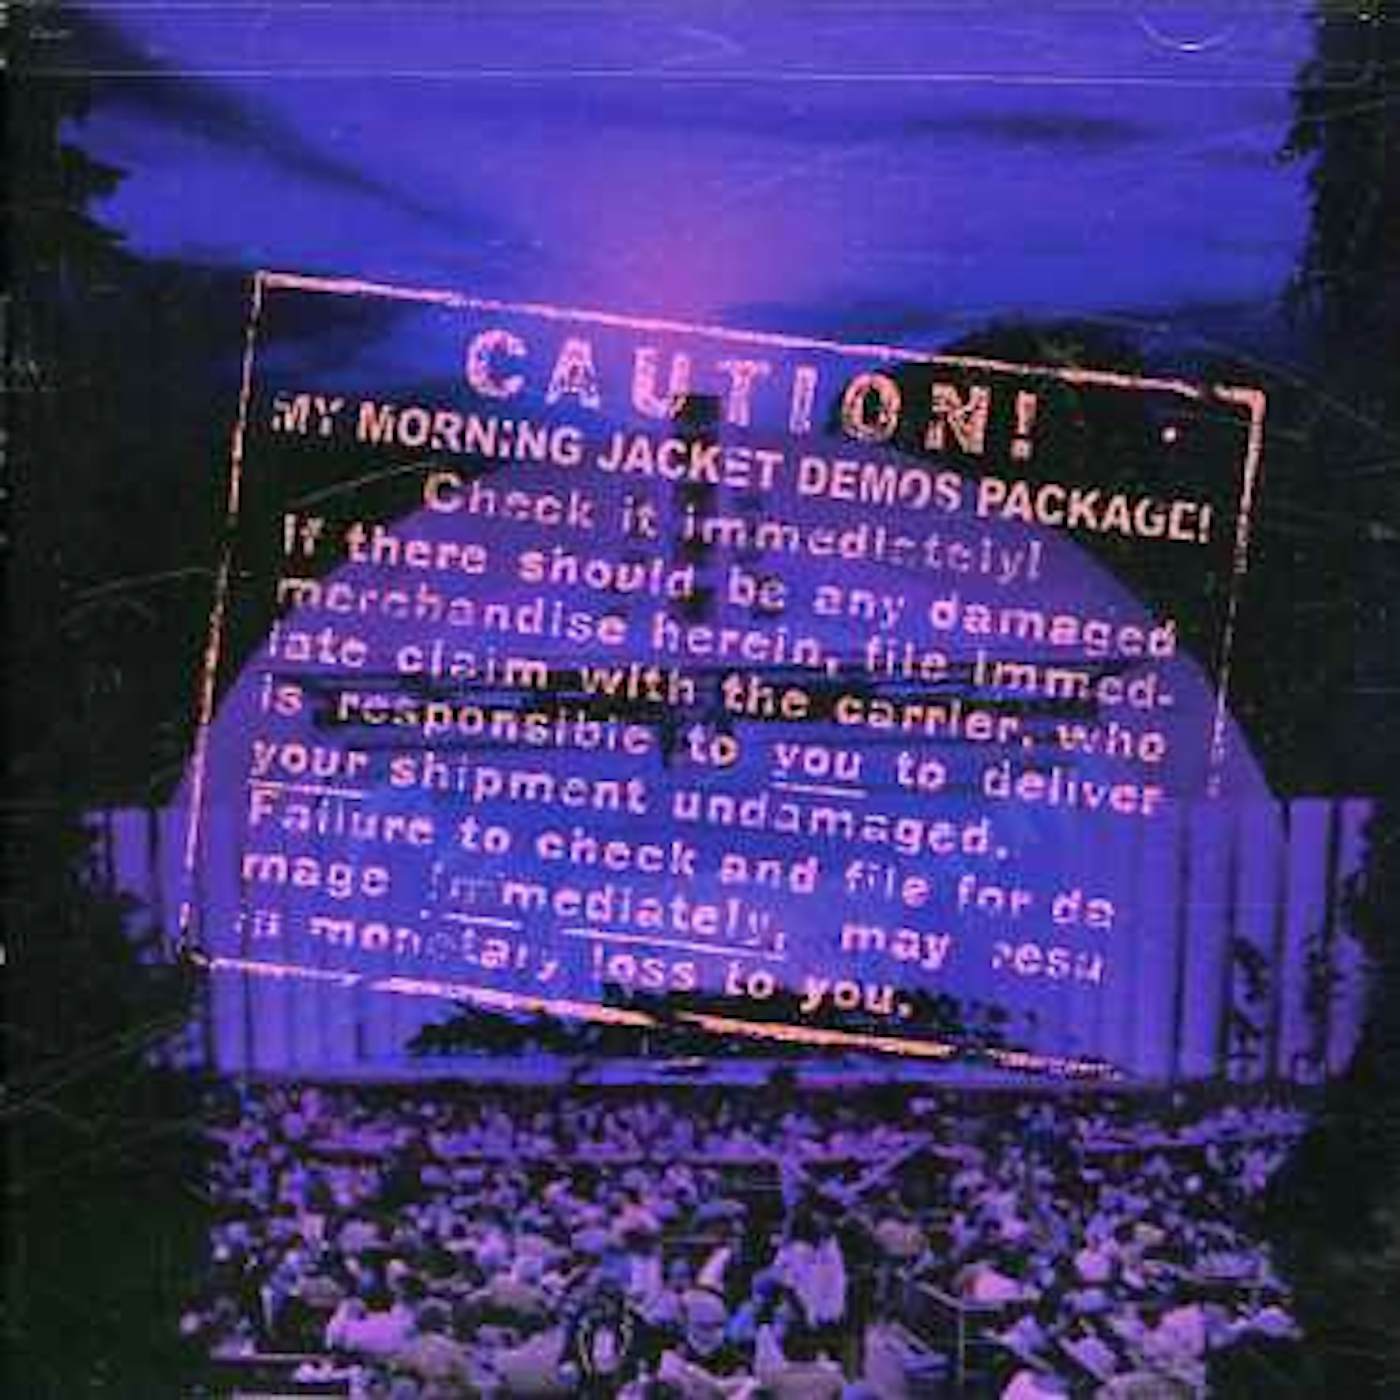 My Morning Jacket AT DAWN & TENNESSEE FIRE DEMOS CD